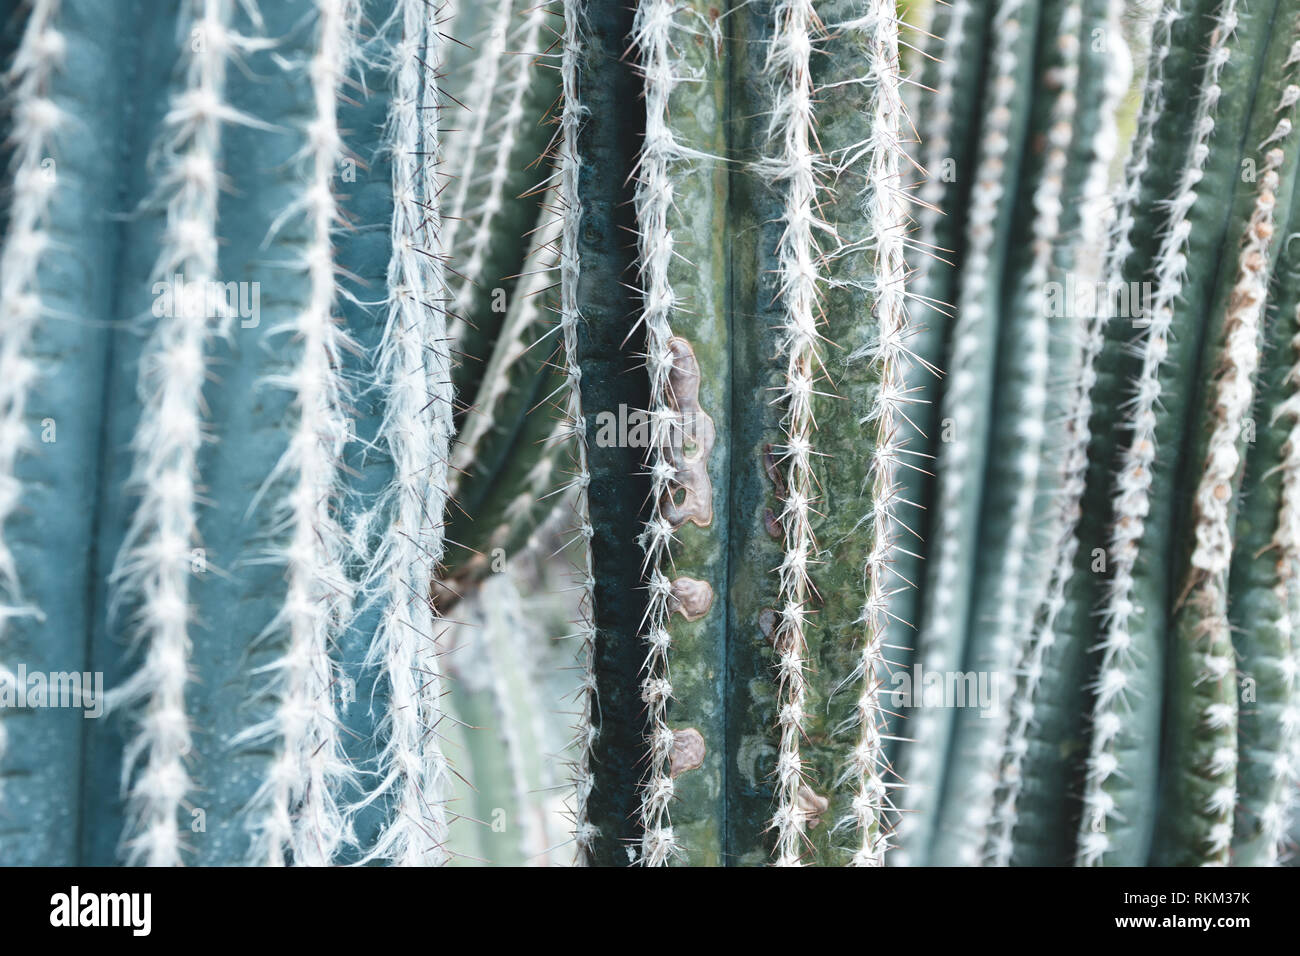 Close-up of prickly turquoise cacti. Shades of turquoise and green. Stock Photo